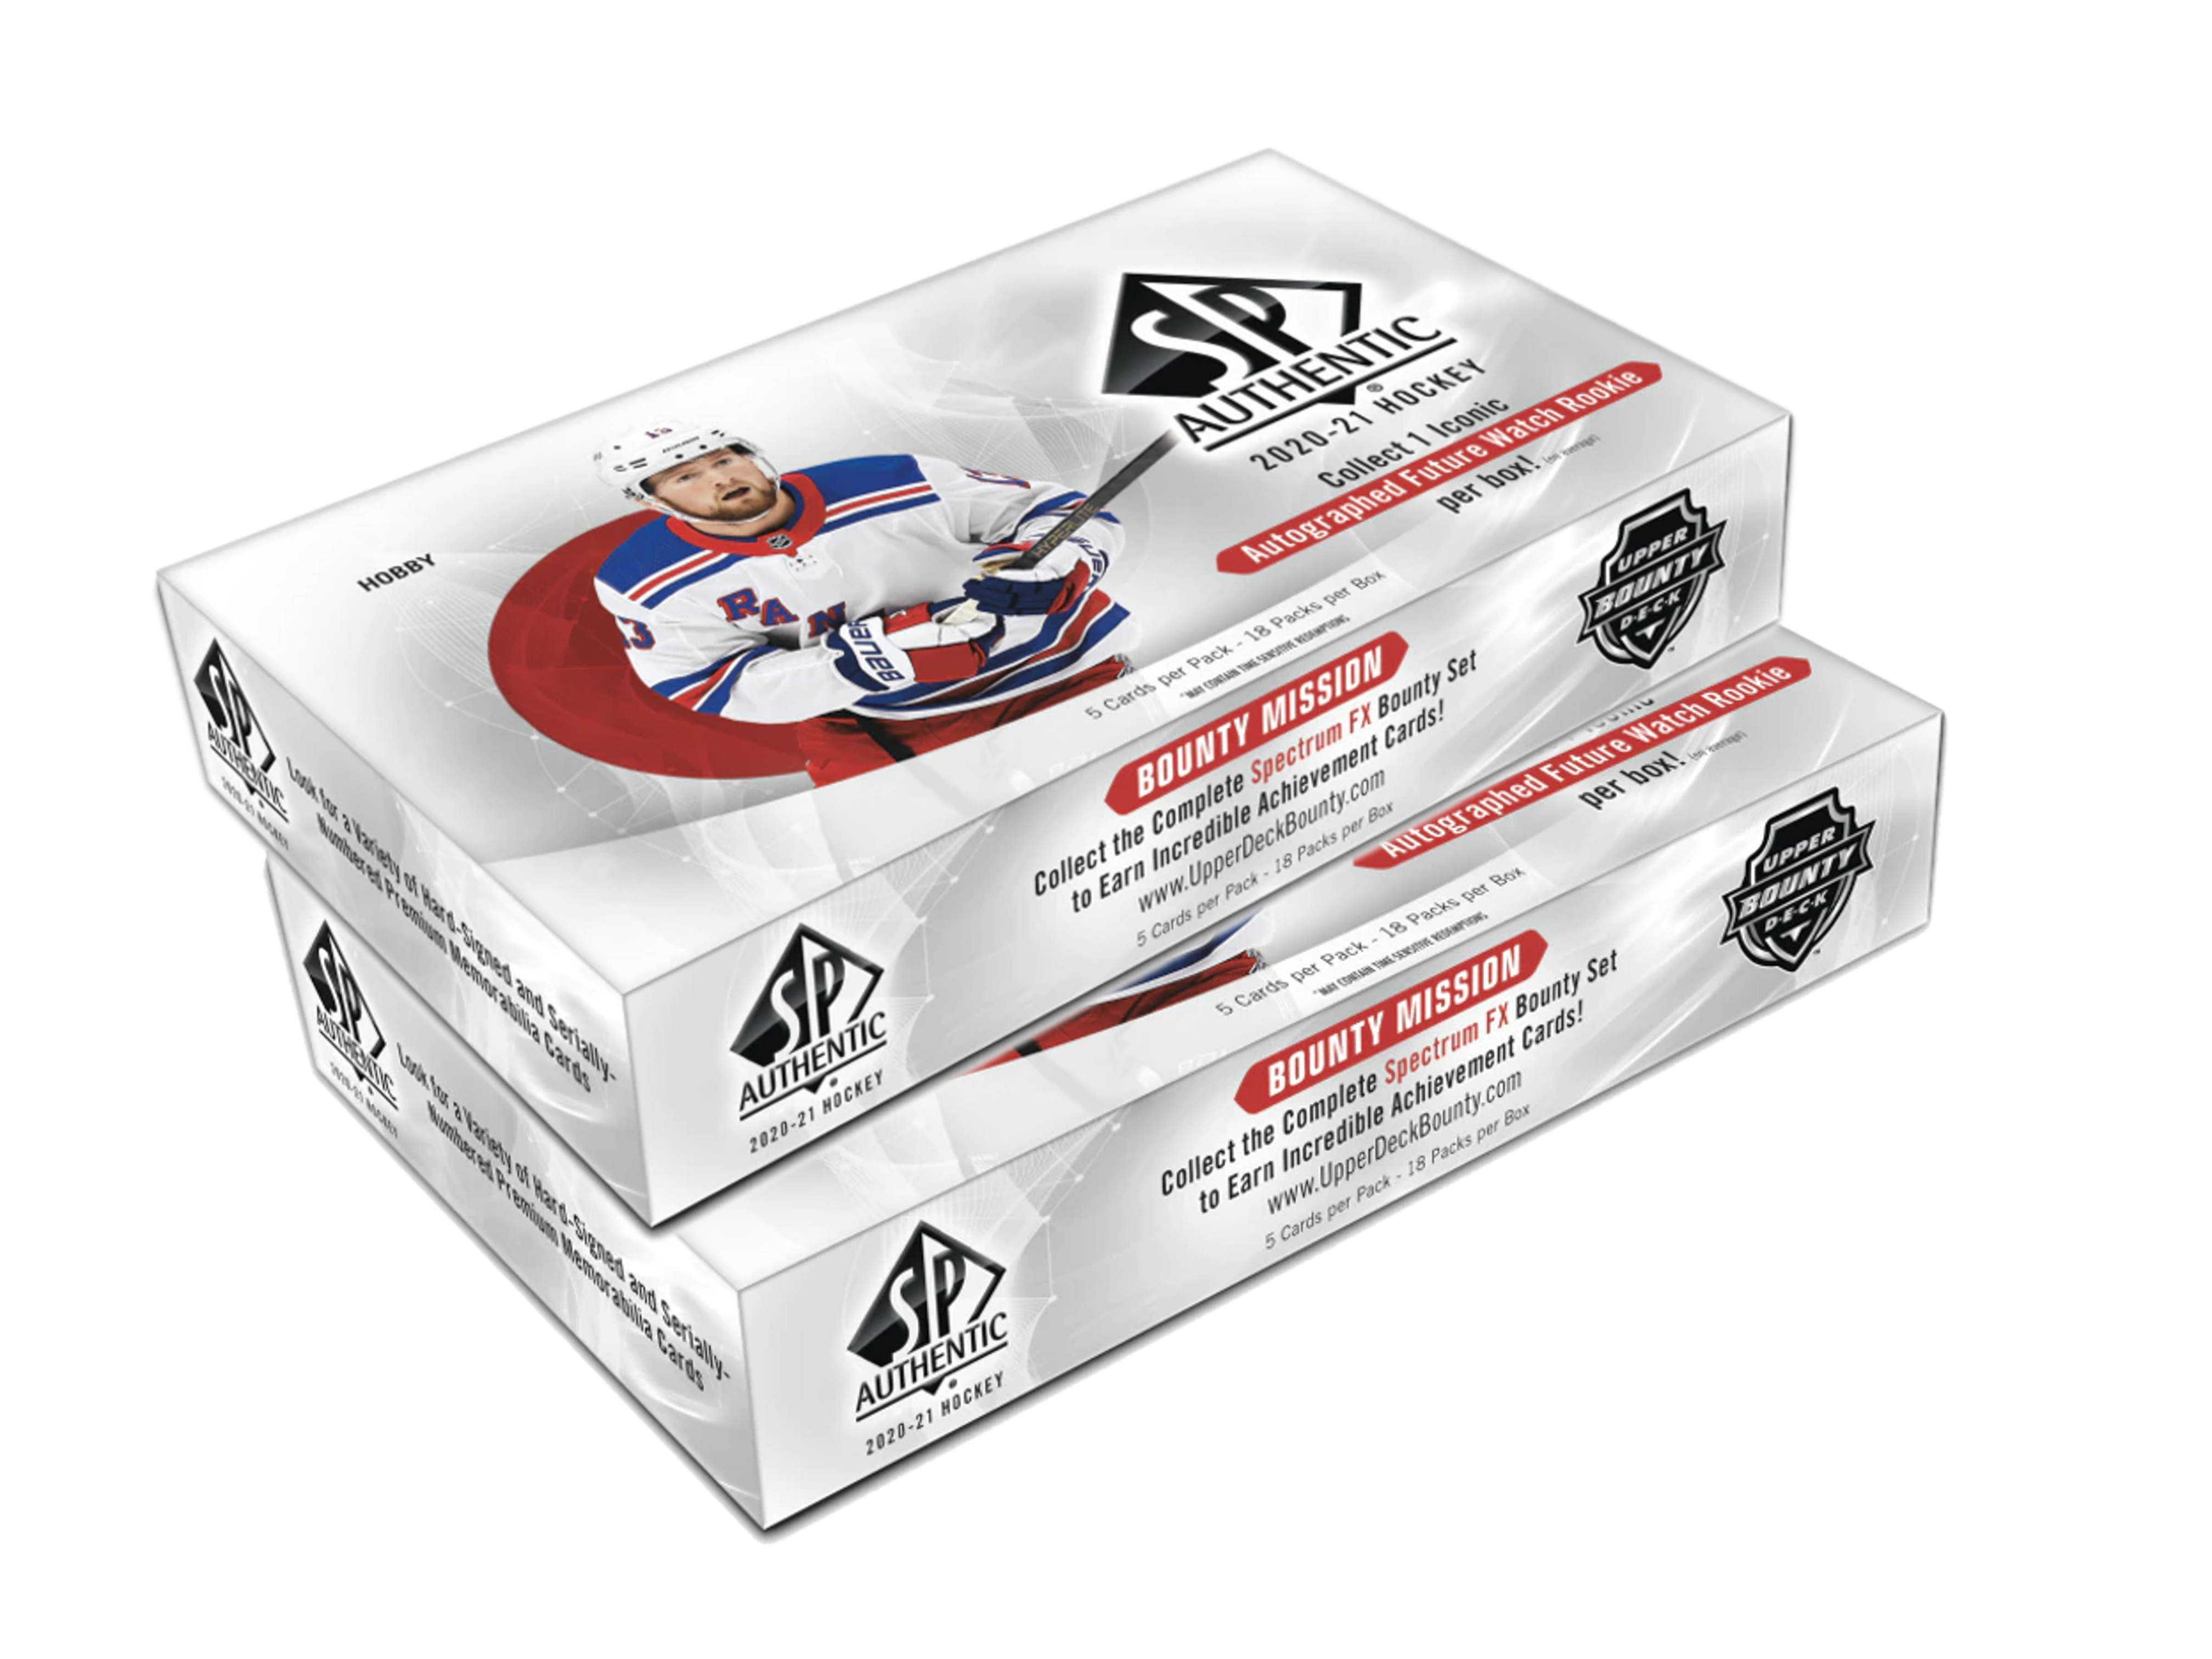 2020-21 Upper Deck SP Authentic Hockey Hobby Box (Lot of 2 Boxes) - Miraj Trading